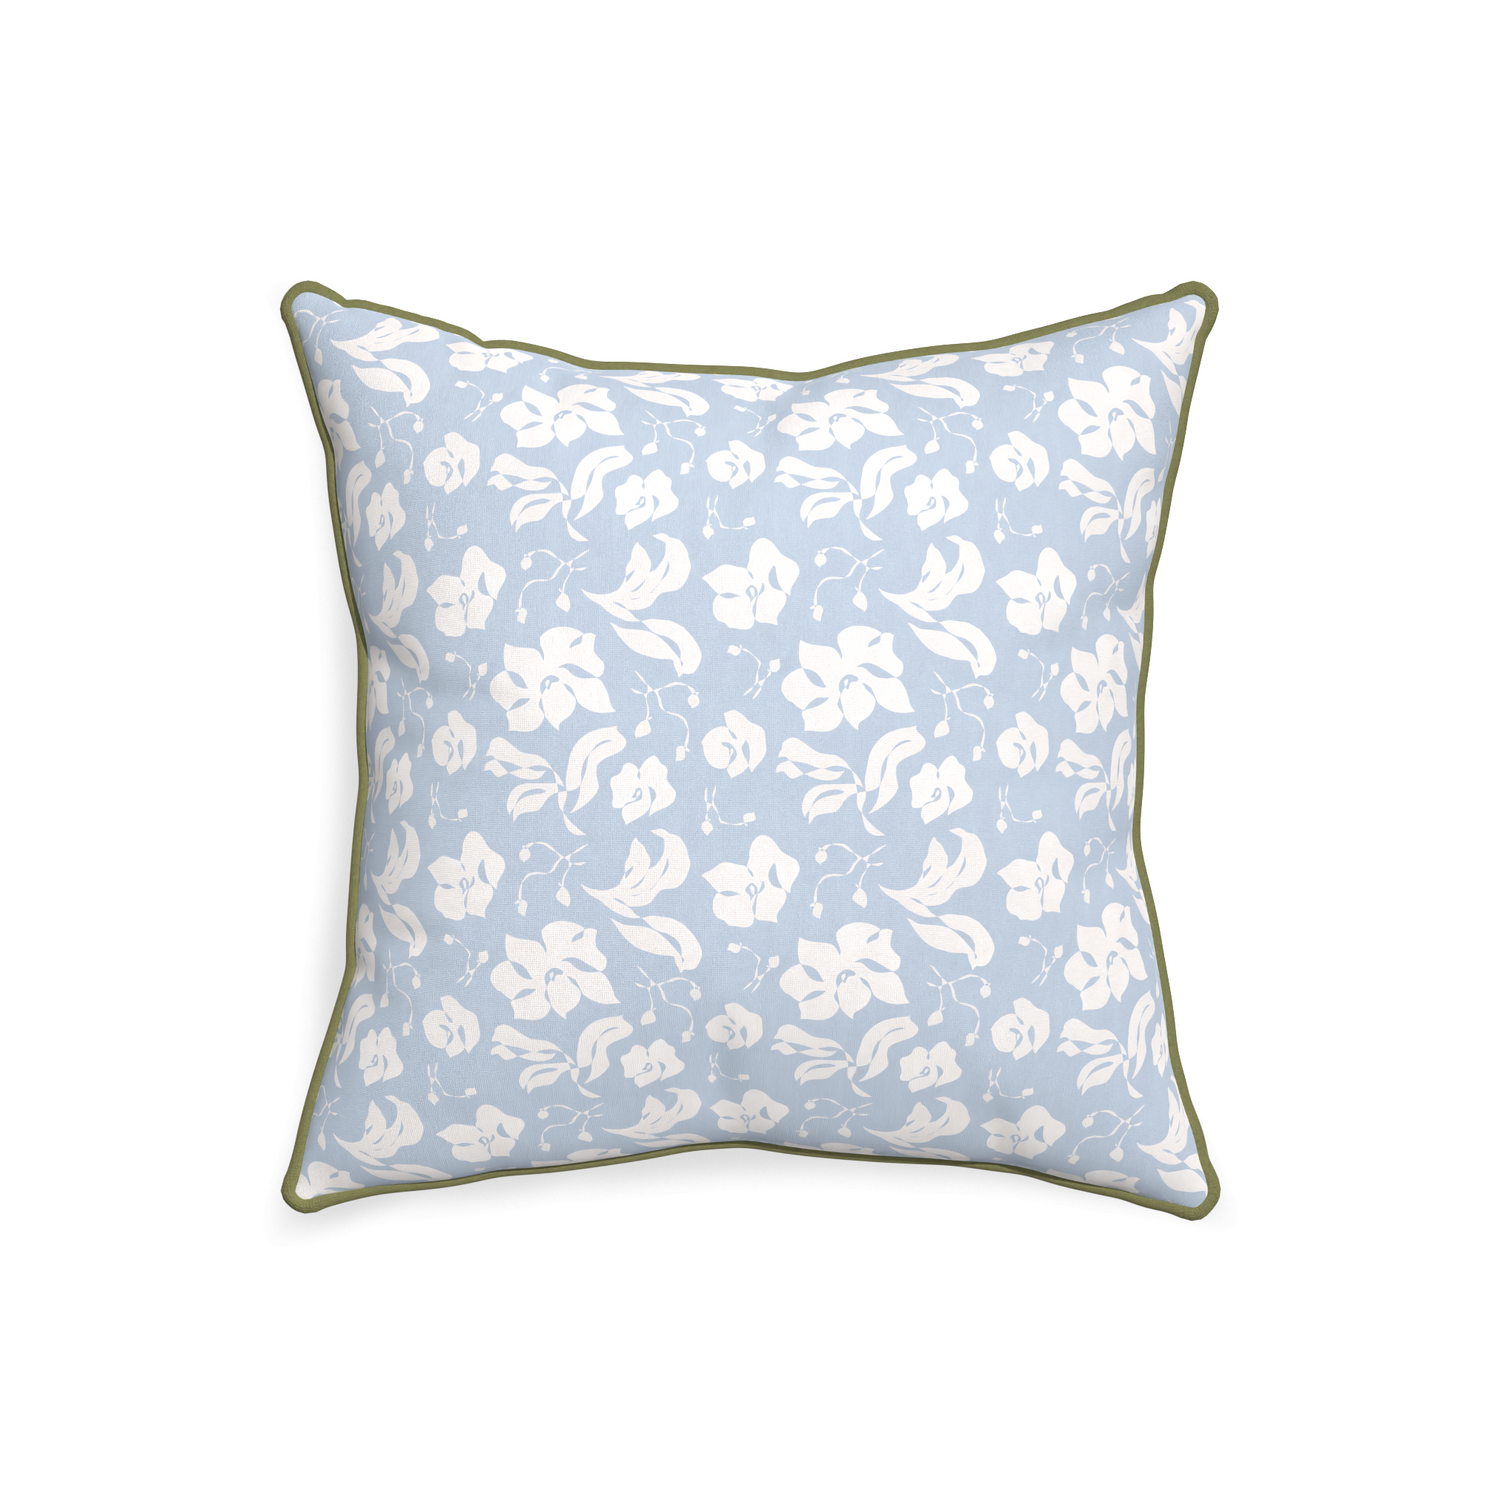 20-square georgia custom pillow with moss piping on white background